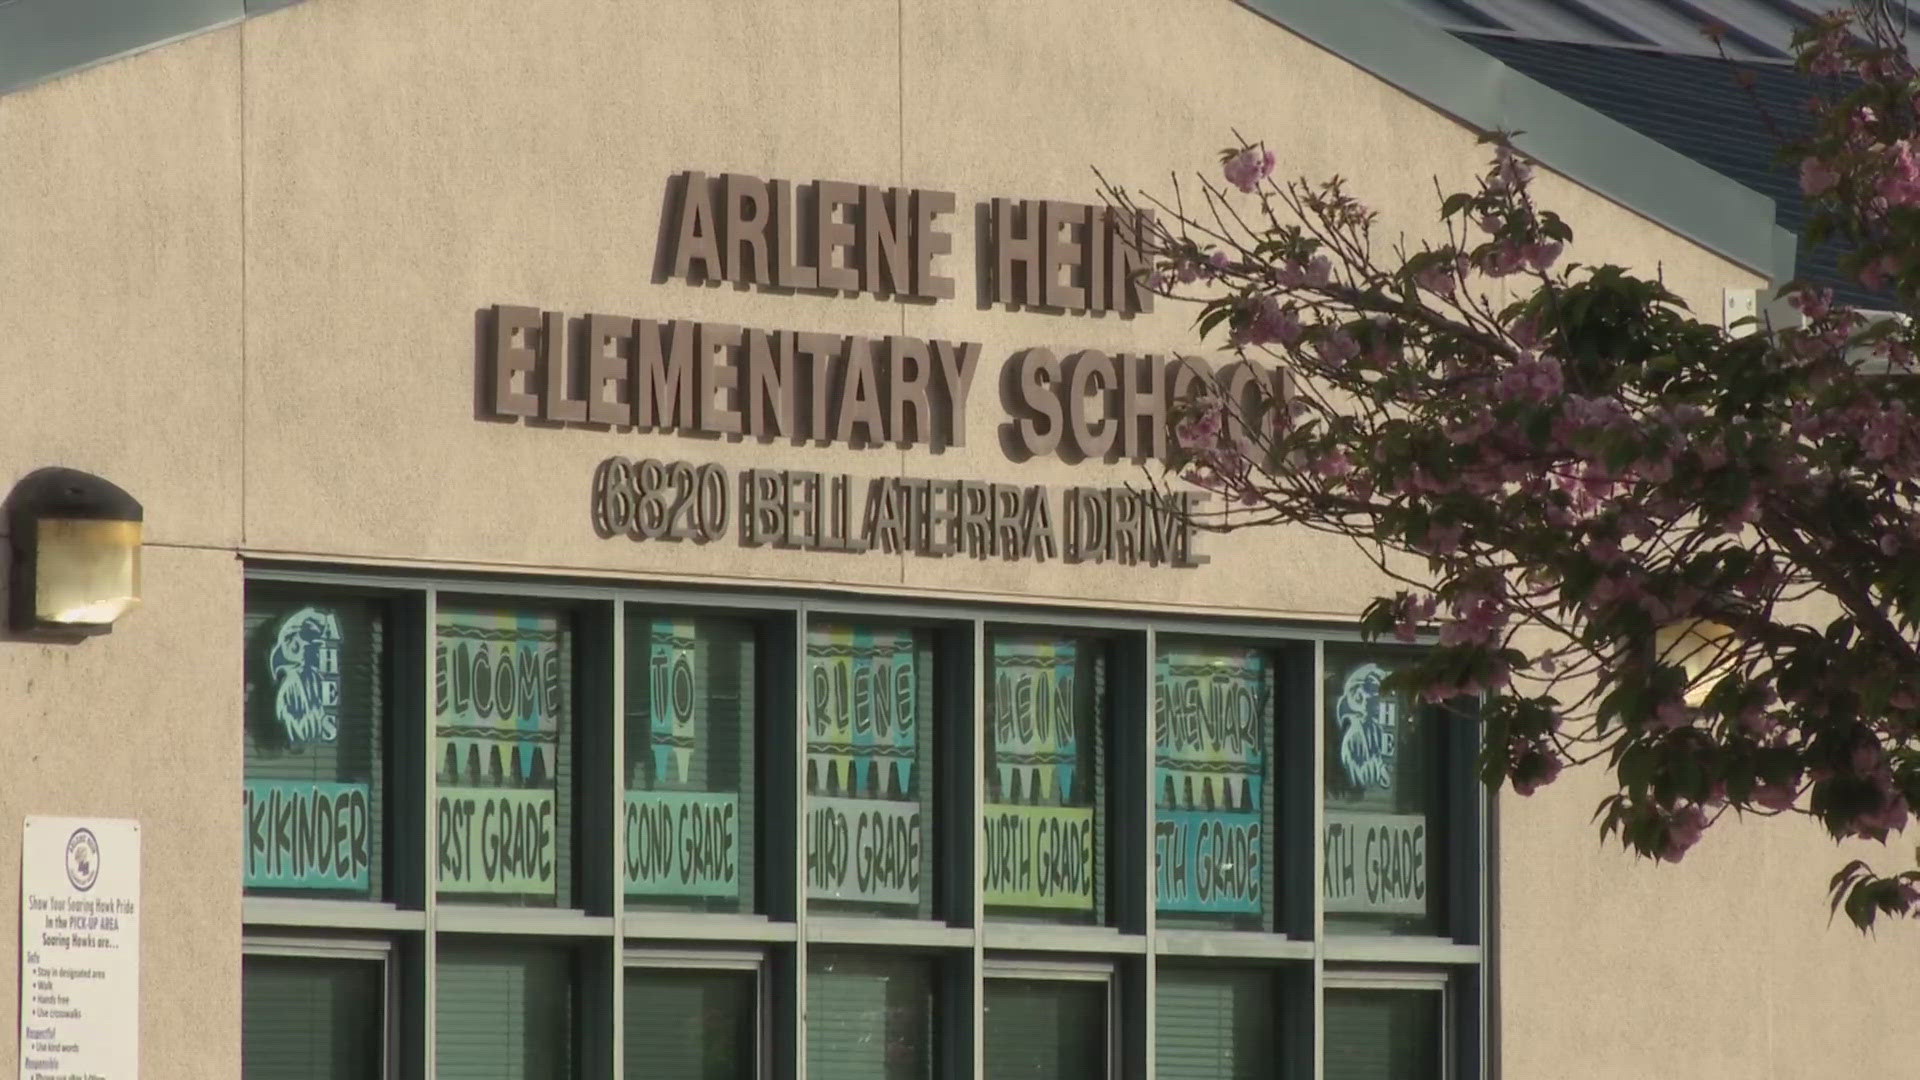 The Sacramento Co. Sheriff’s Office says a teacher’s aide was cited and released after they received a call that the aide potentially assaulted a 9-year-old student.